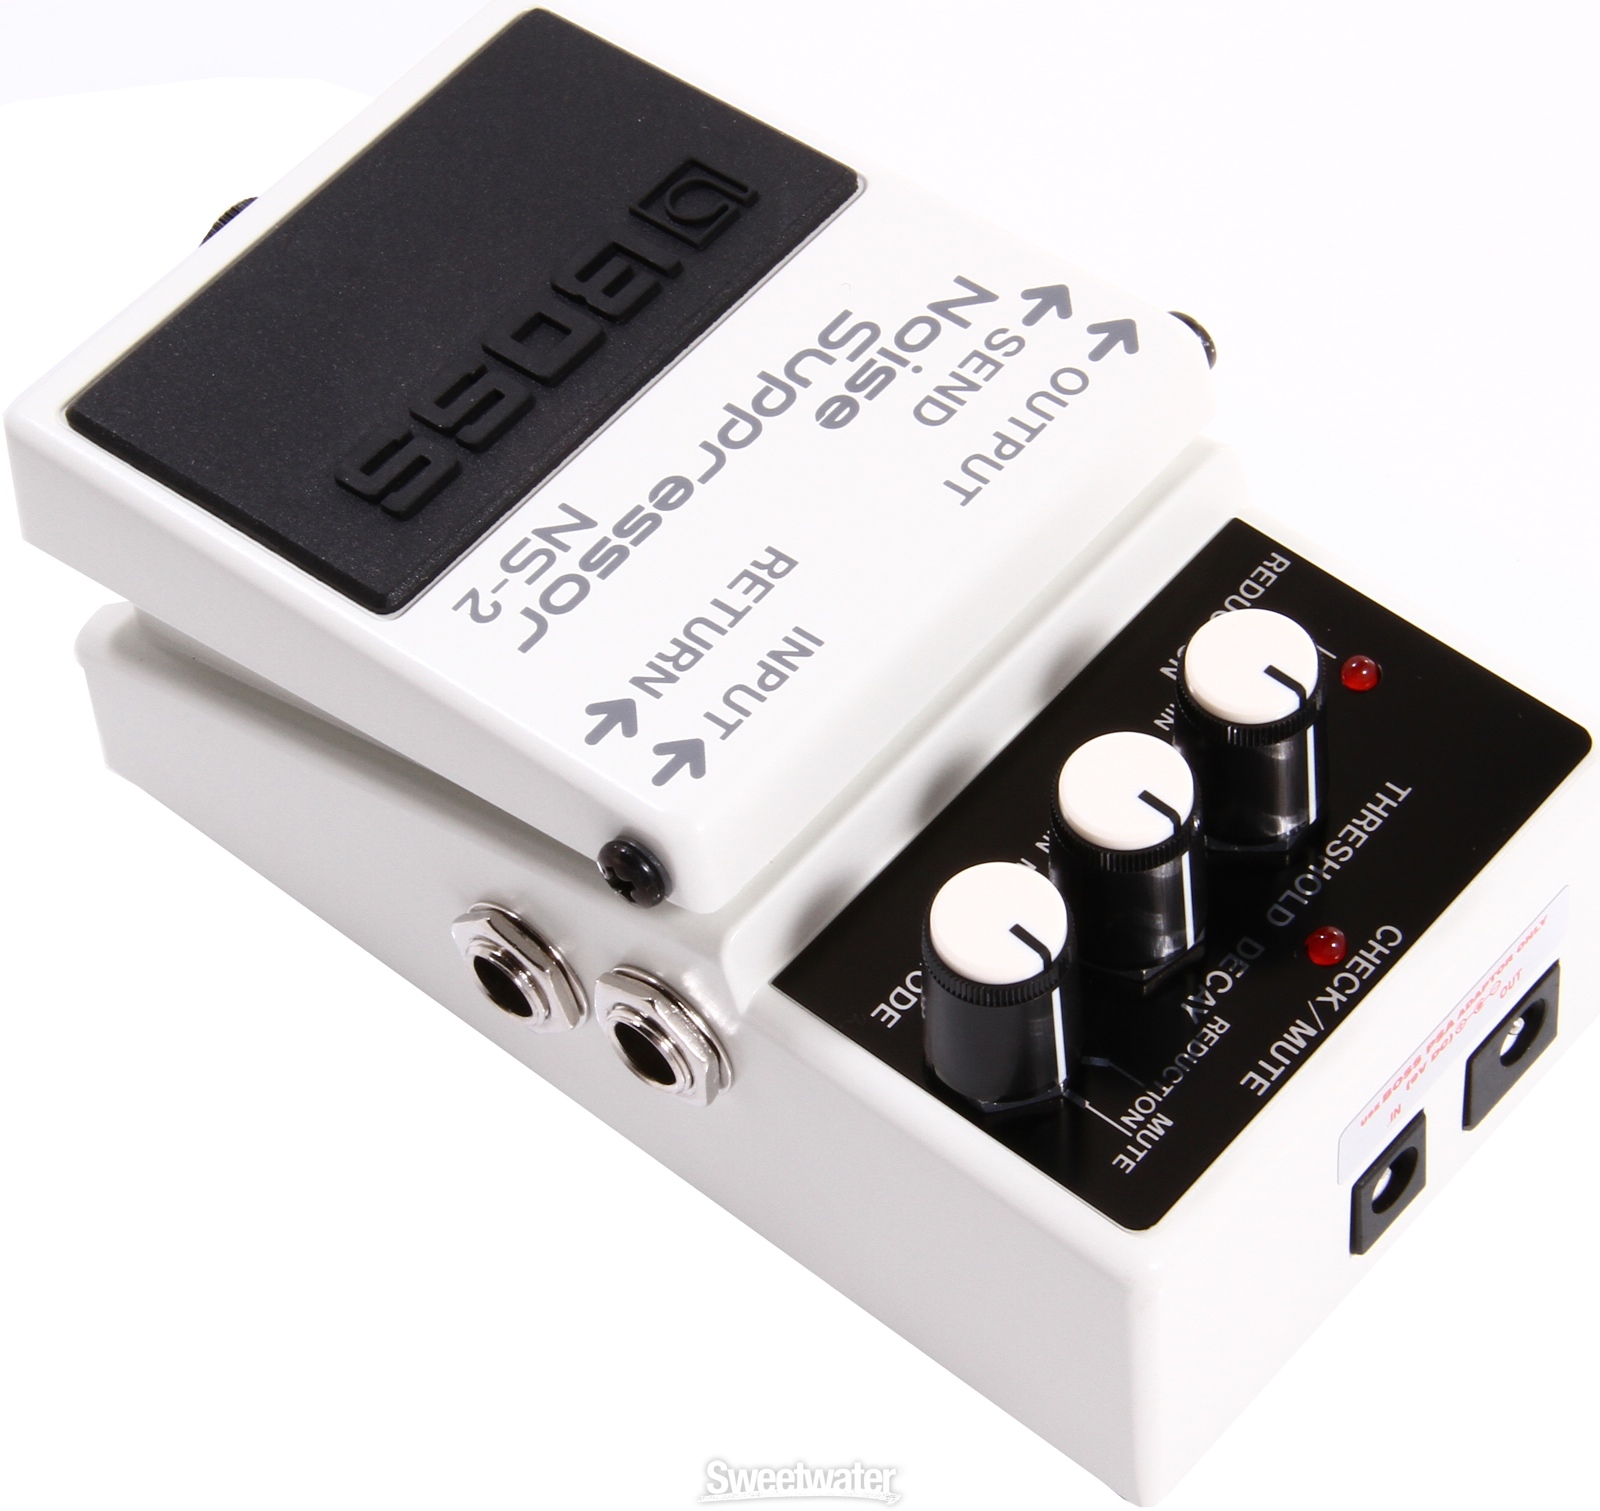 Boss Ns-2 Noise Suppressor - Compressor/sustain/noise gate effect pedaal - Variation 2